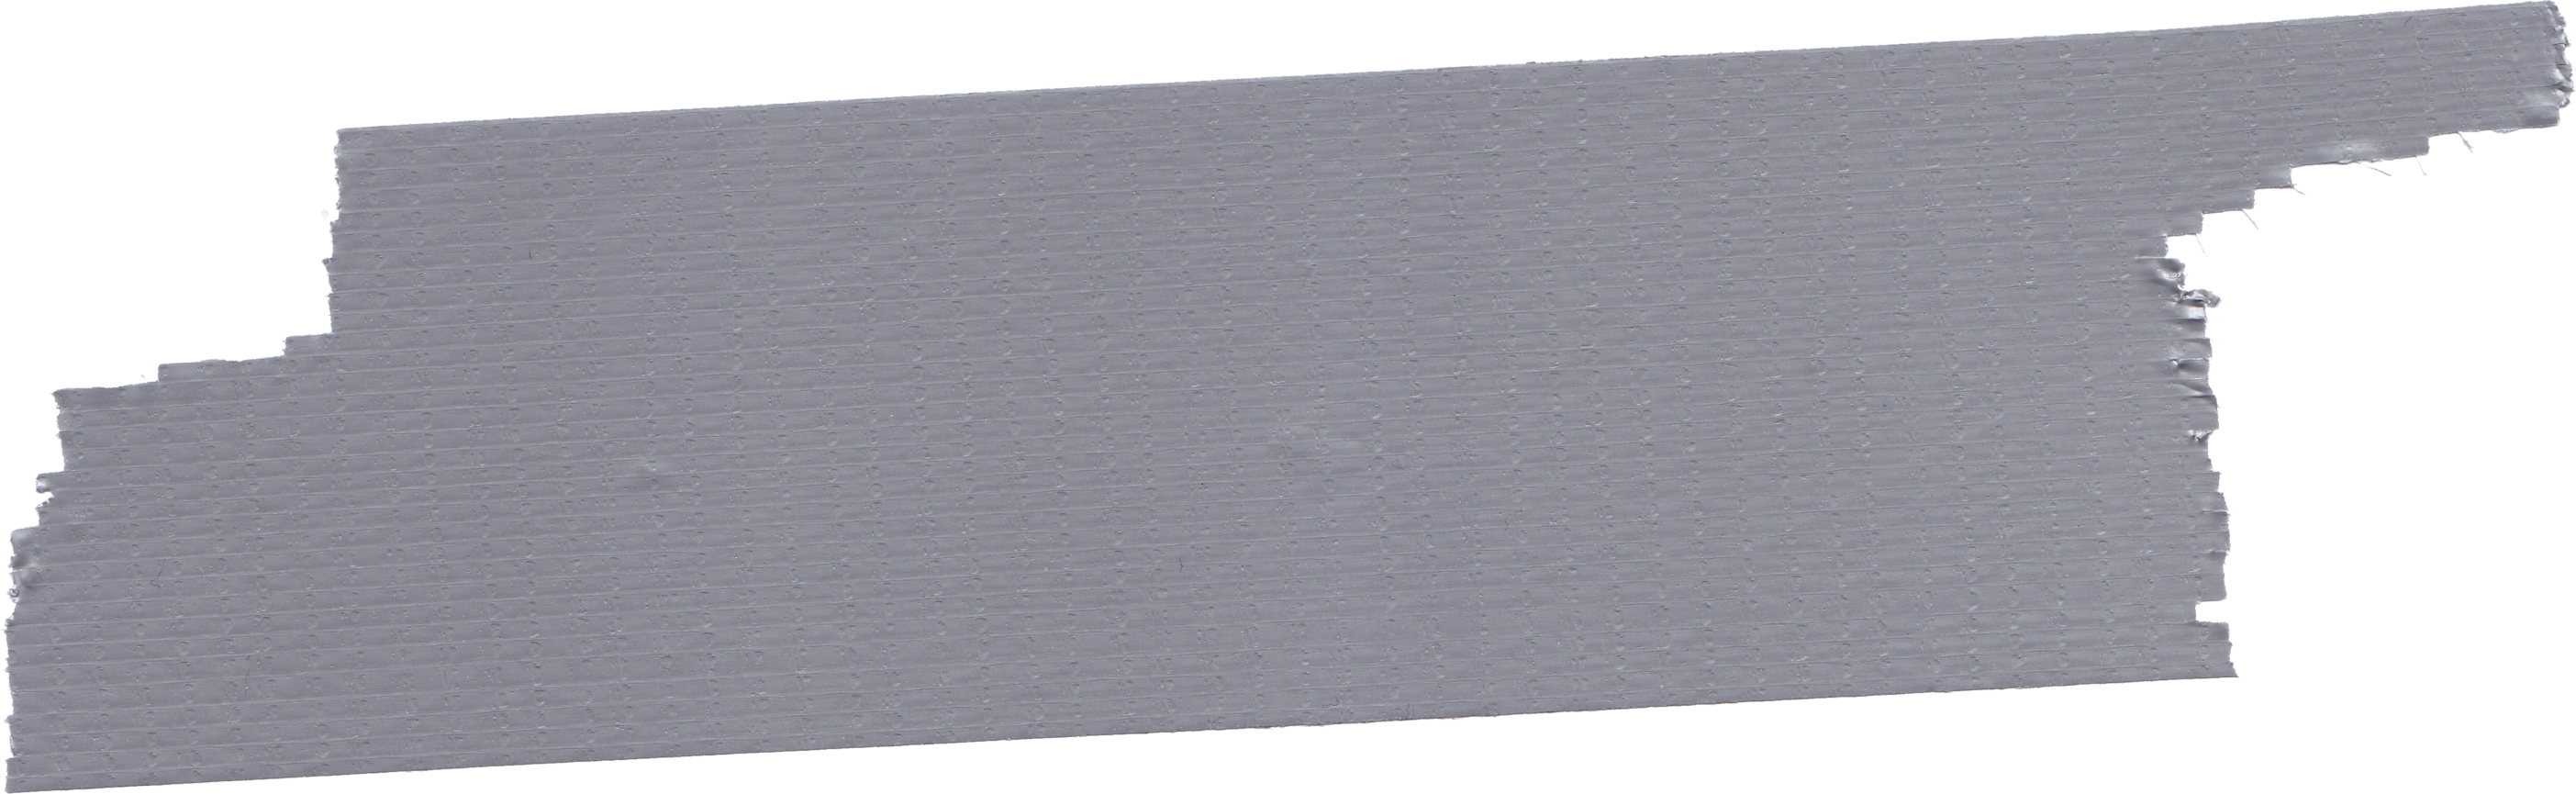 6 Duct Tape (PNG Transparent).